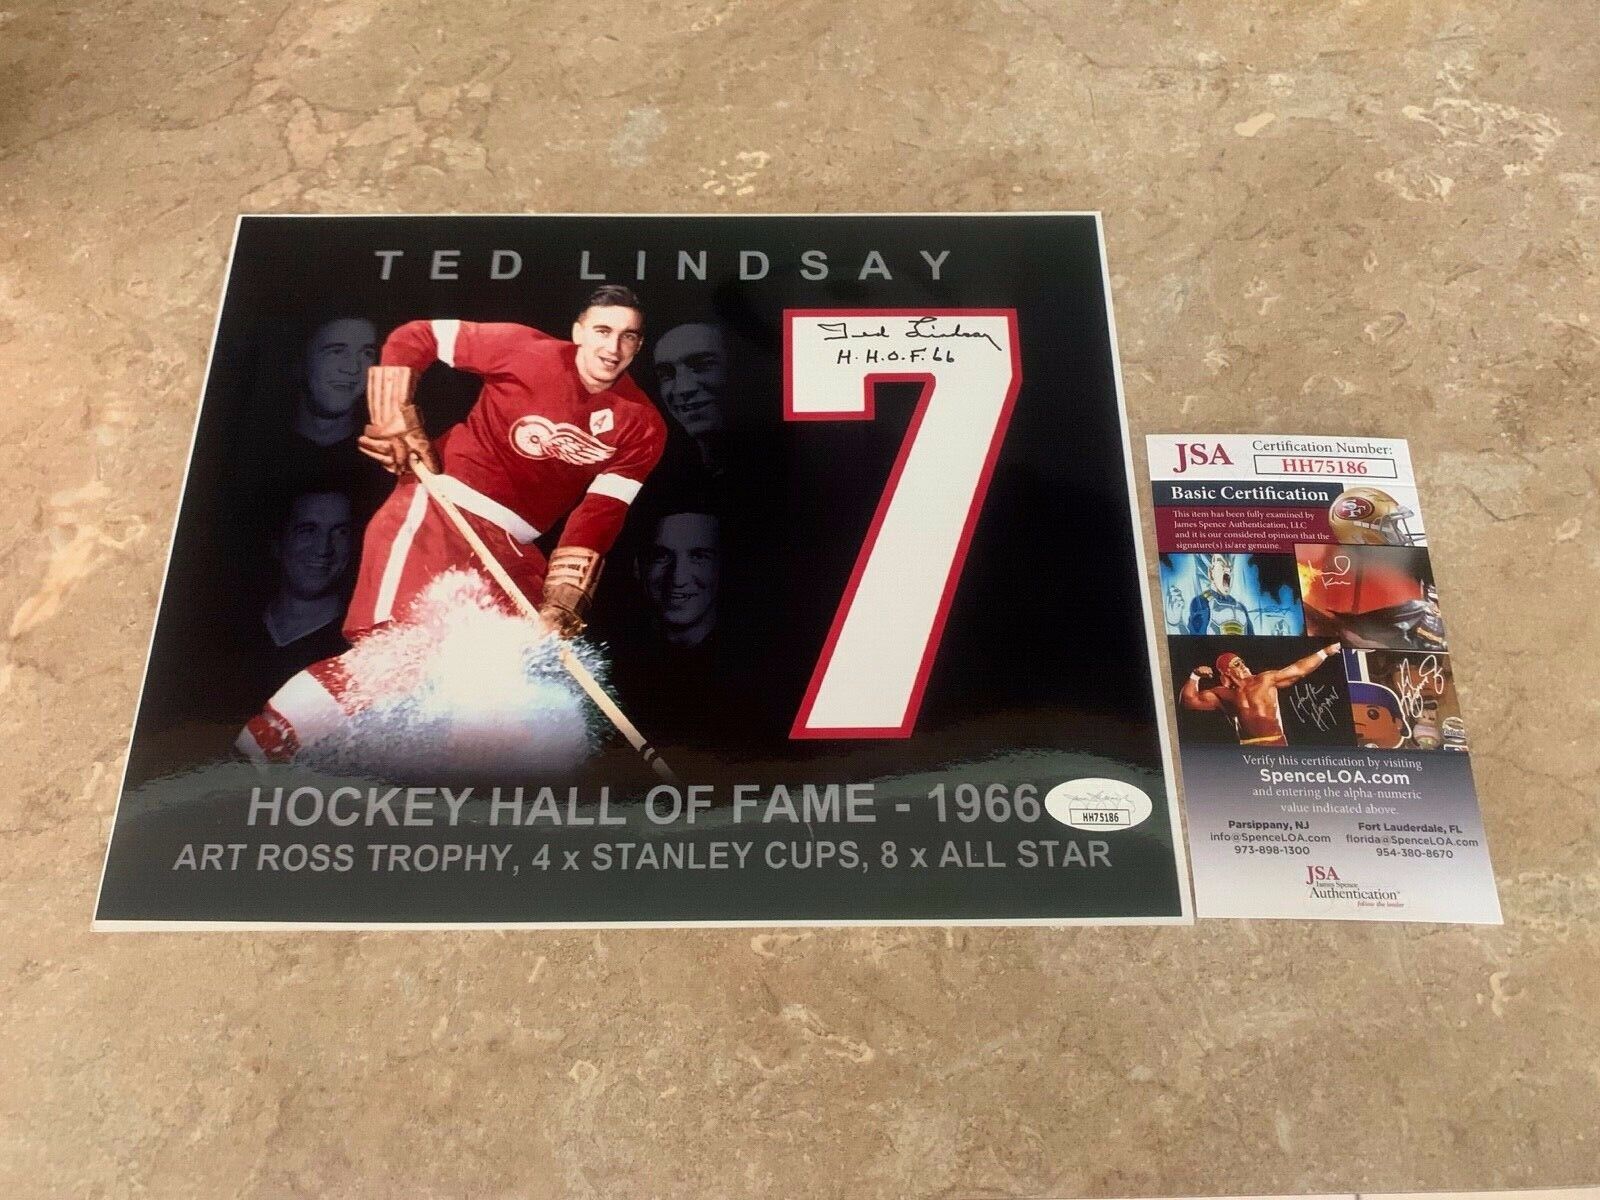 Ted Lindsay Red Wings HHOF 1966 Autographed 8x10 Hockey Photo JSA COA HH75186